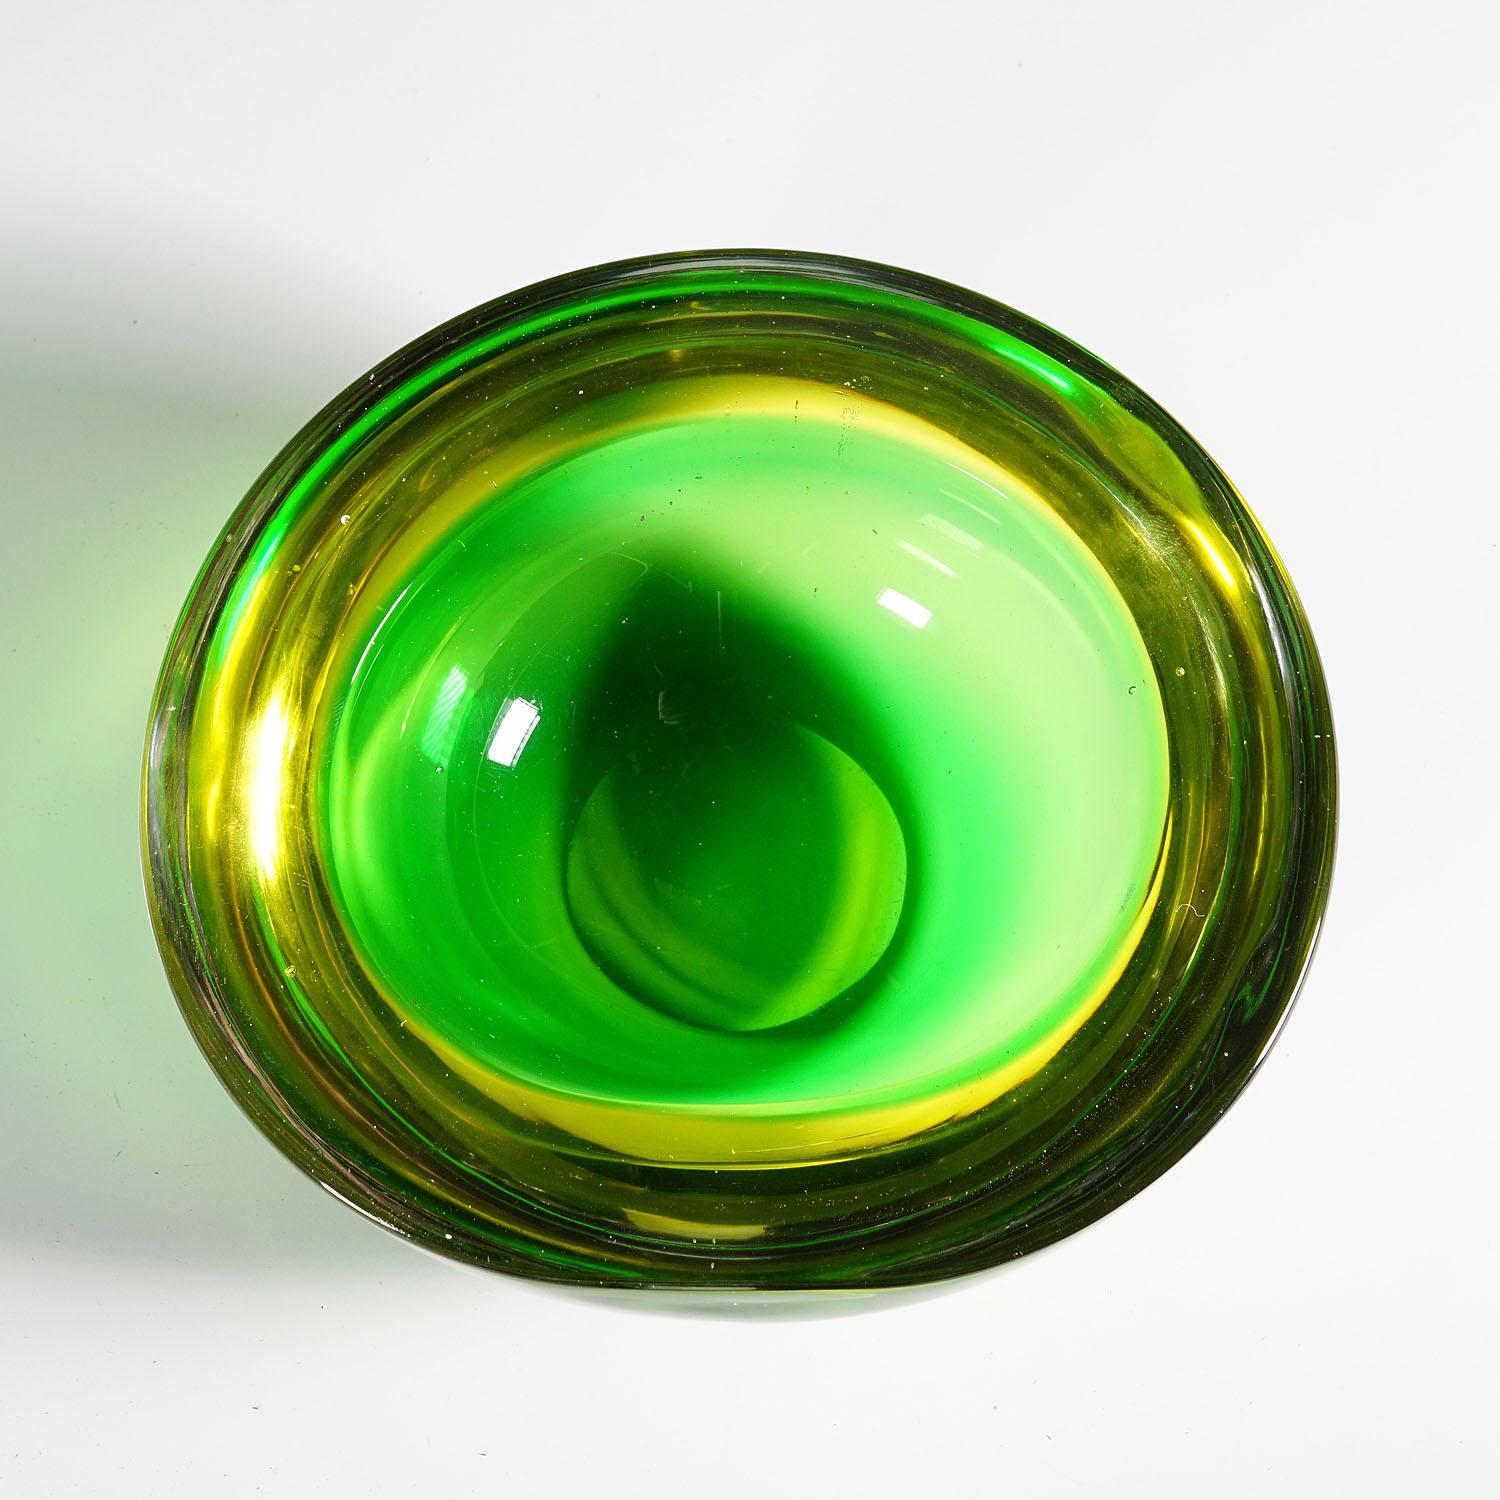 Italian Archimede Seguso Geode Bowl in Green and Yellow, Murano Italy Ca. 1960s For Sale